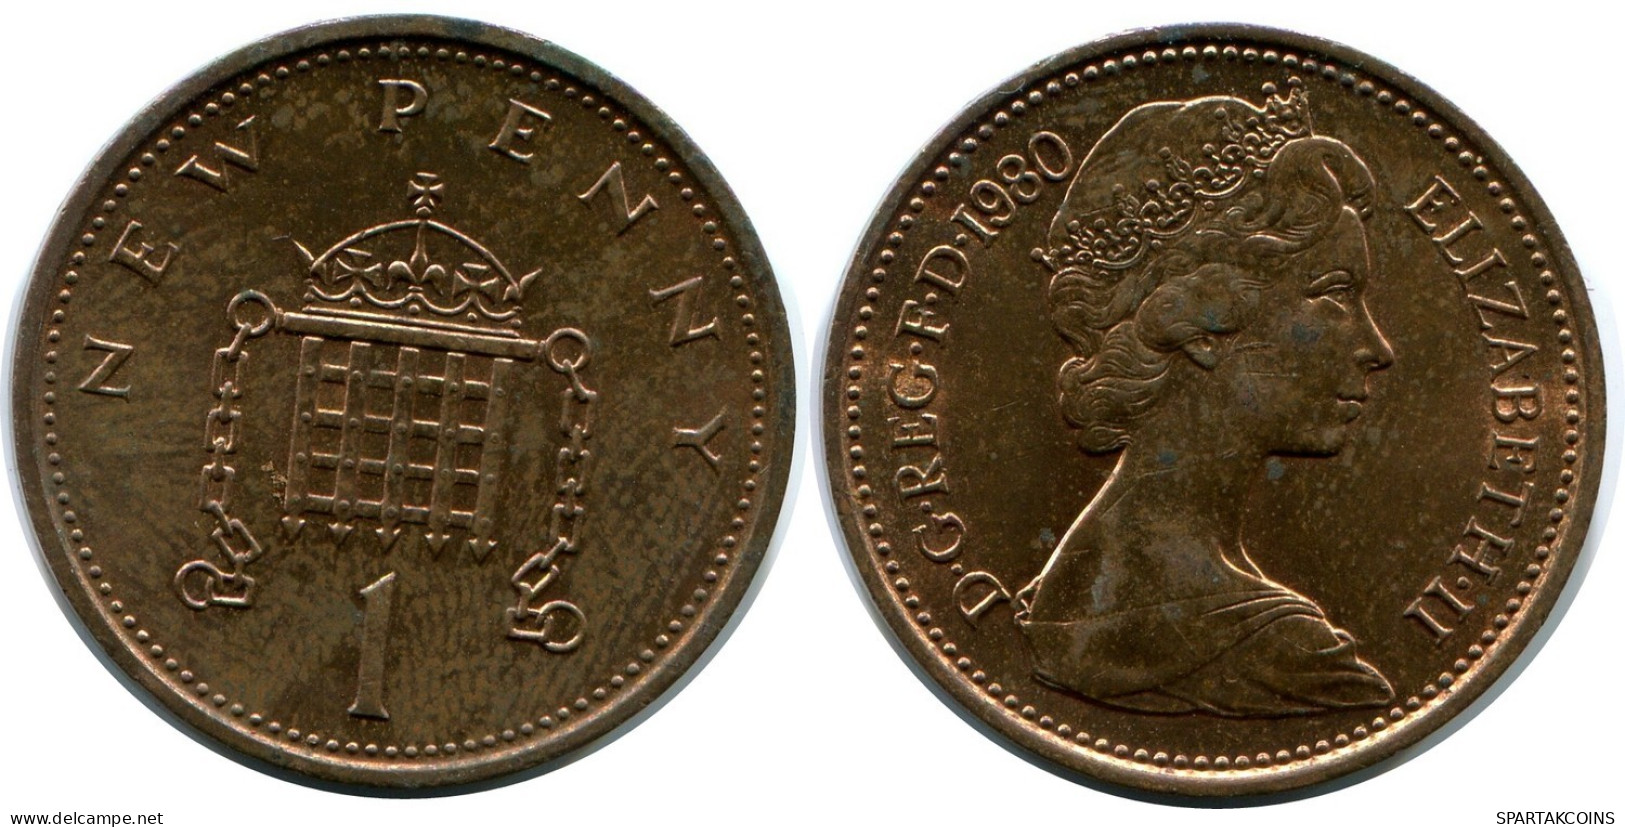 NEW PENNY 1980 UK GREAT BRITAIN Coin #AZ044.U.A - 1 Penny & 1 New Penny